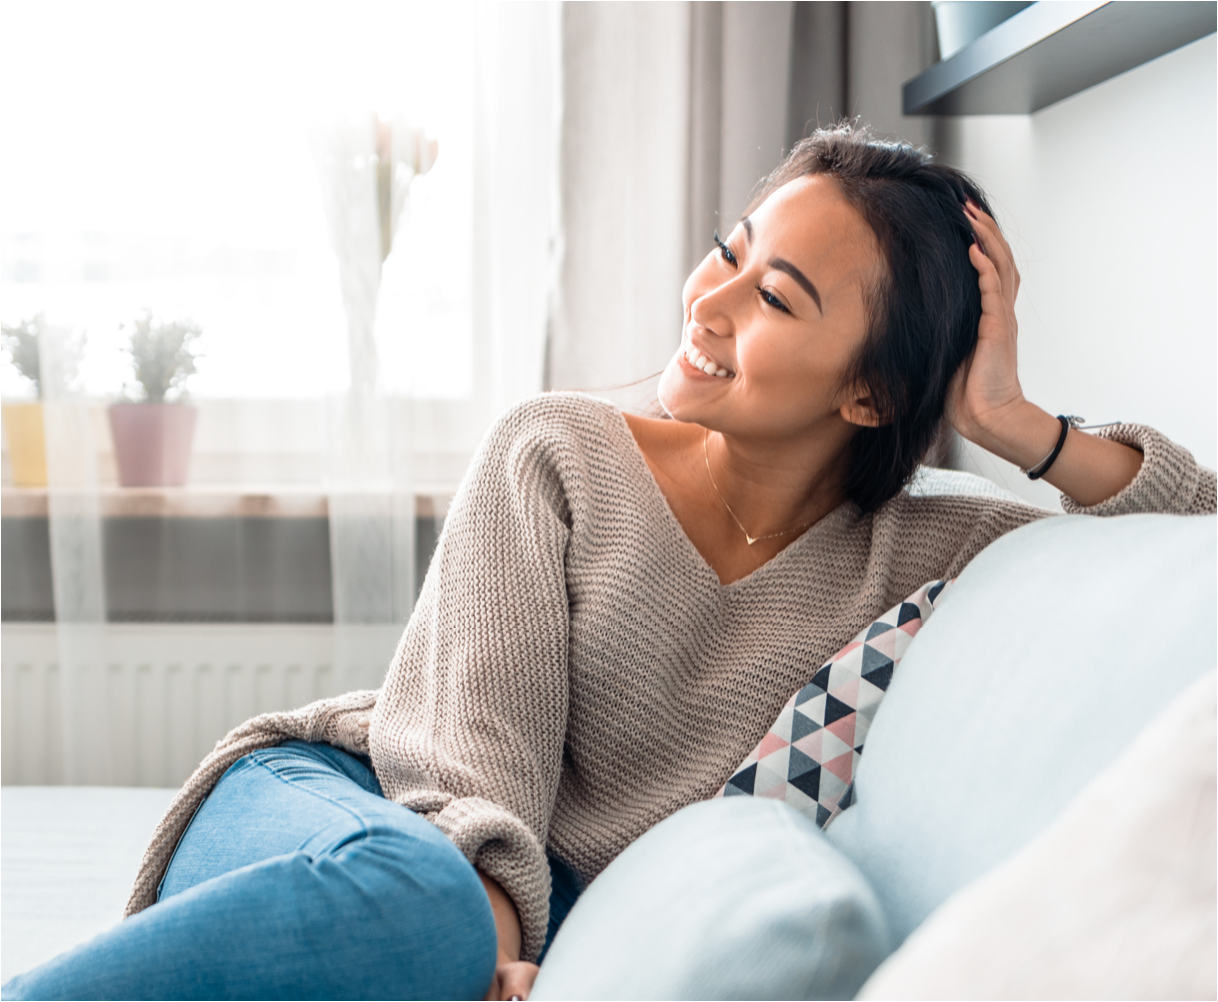 woman relaxing on a couch. She is smilling